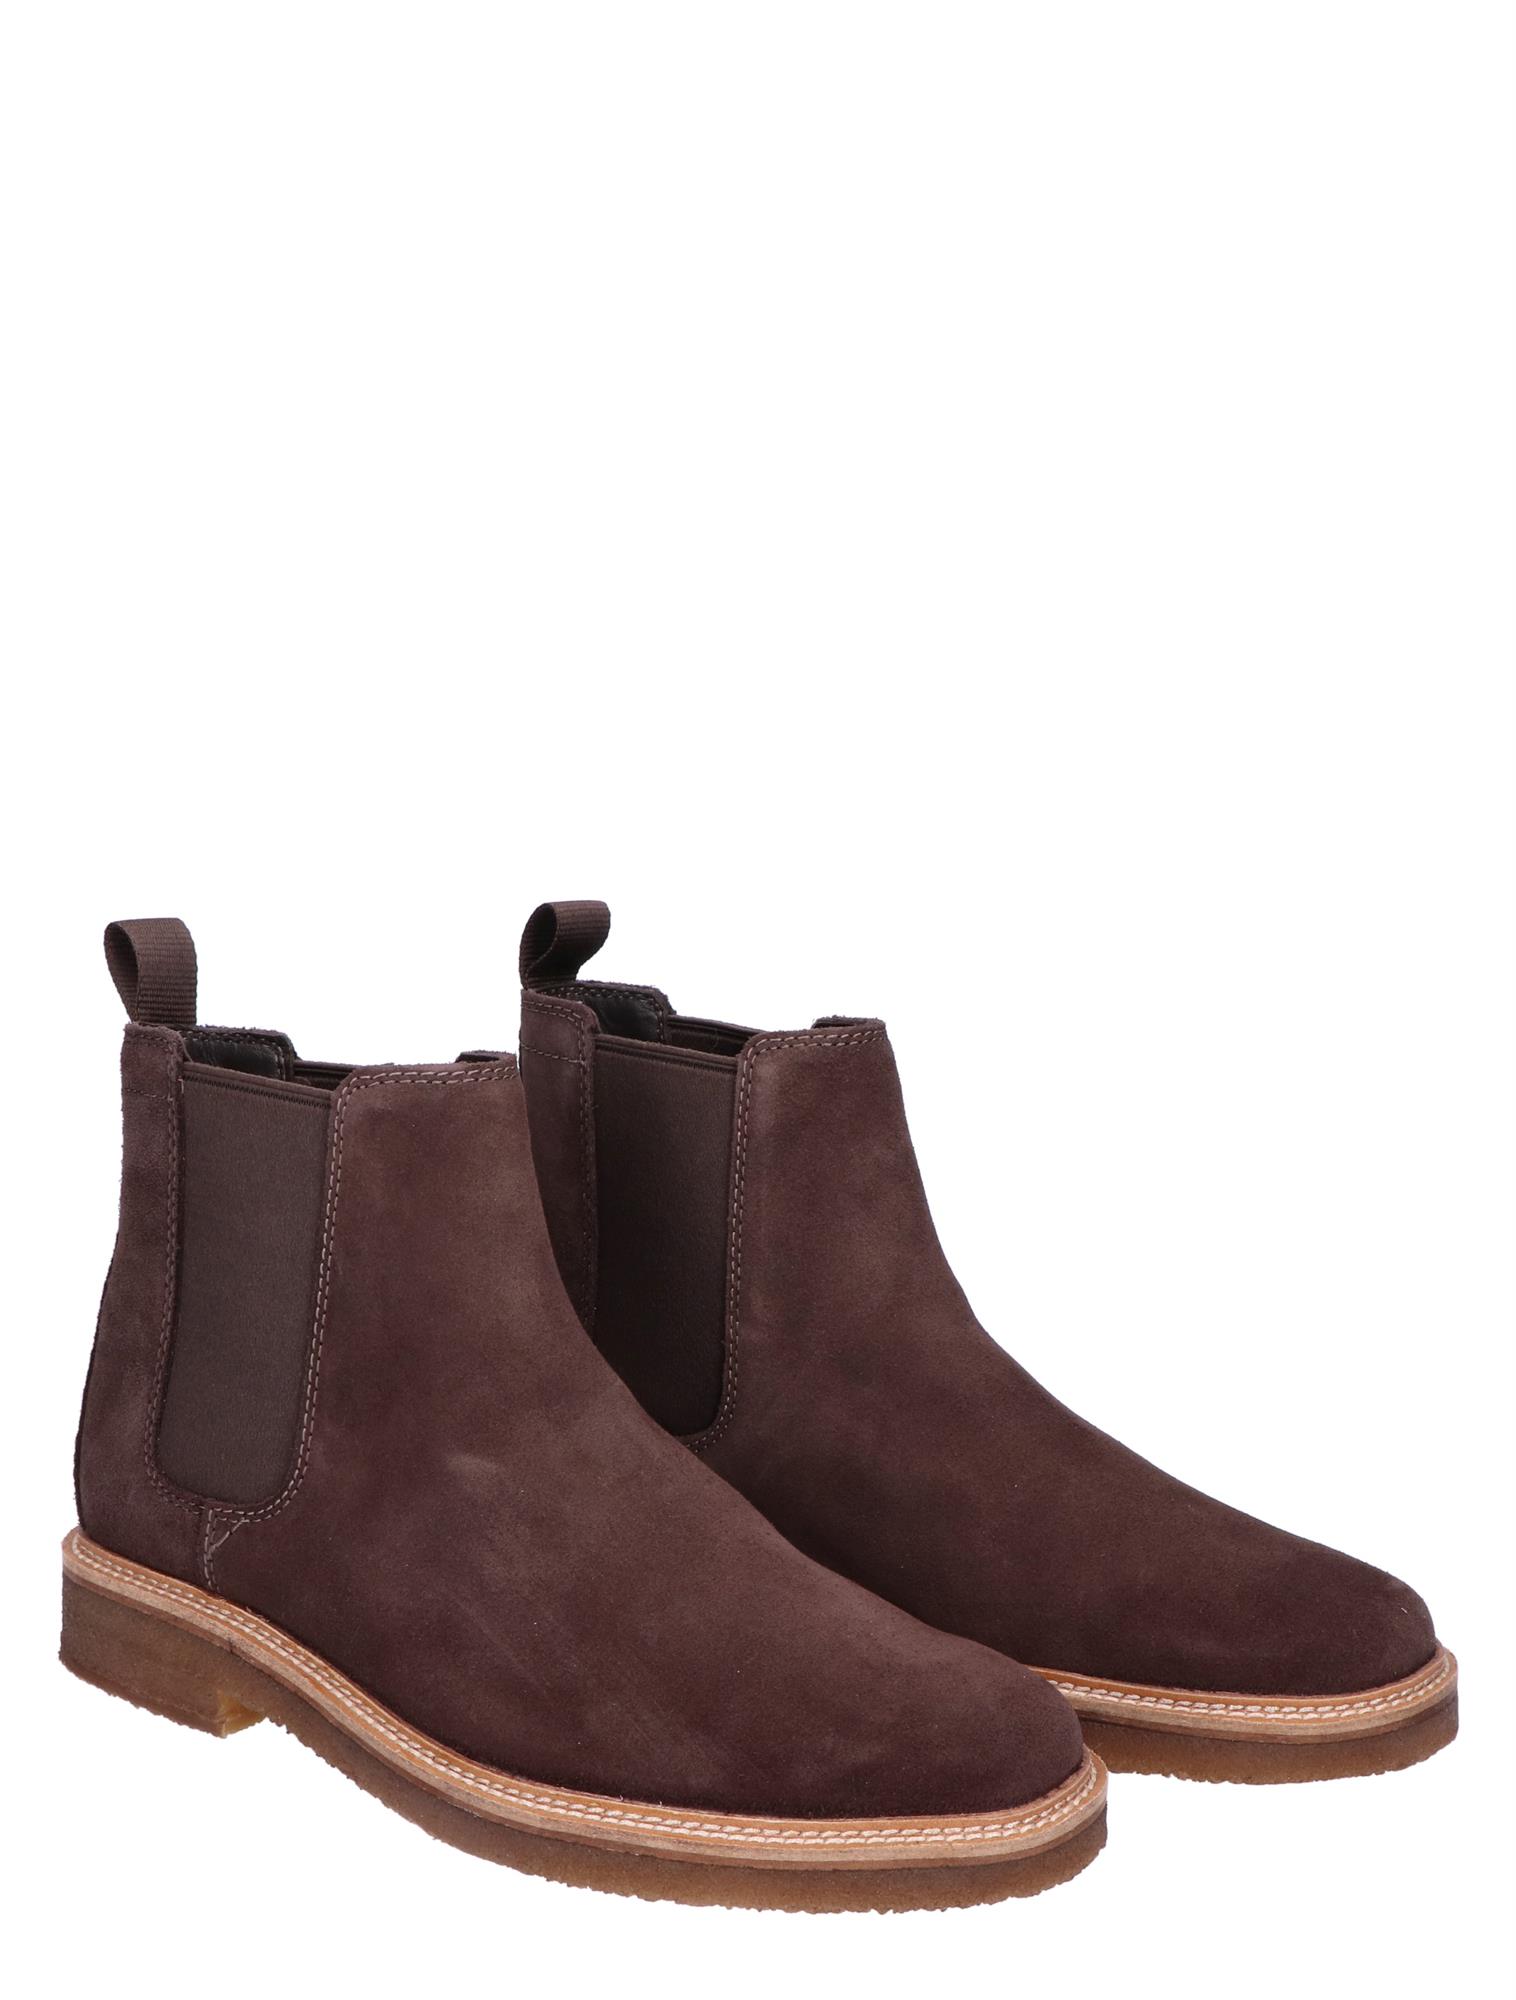 Men's Clarkdale Easy Boot - Beeswax Leather